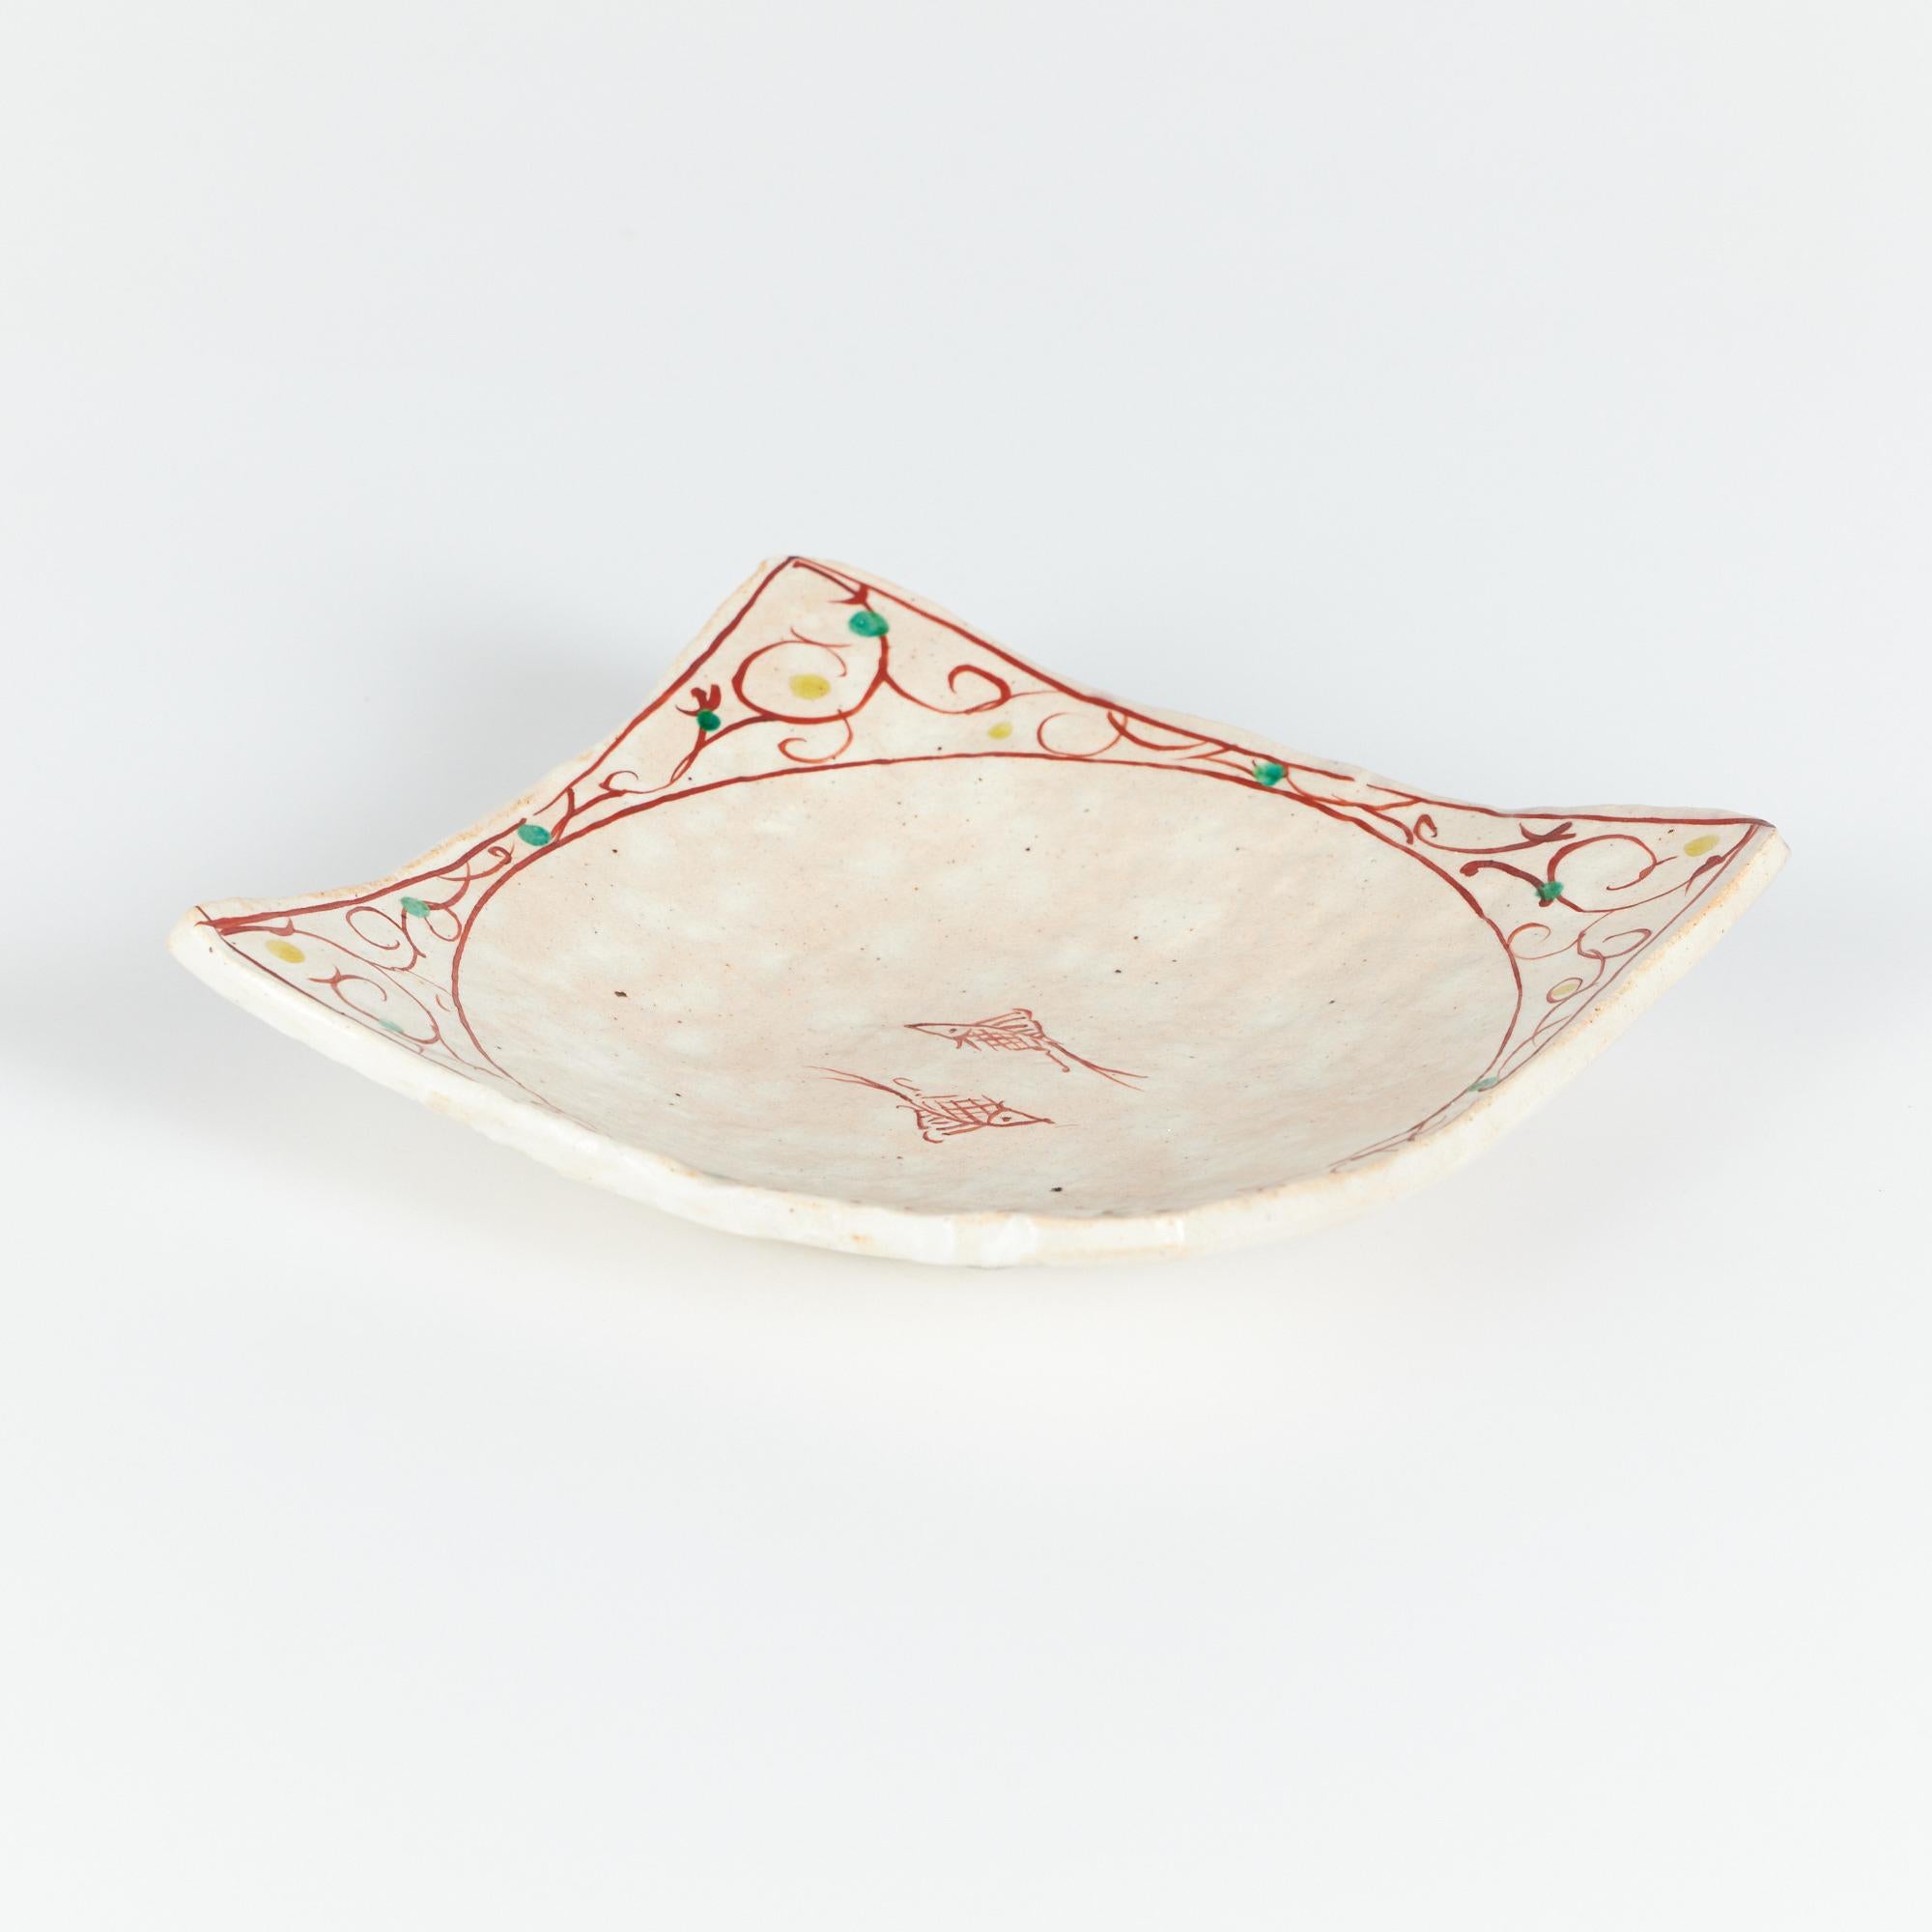 Ceramic plate features a square shape with turned up corners. The plate is glazed in a soft cream and beige coloring with speckling throughout. The piece is finished with two hand painted red fish at the center of the plate and a floral-like boarder